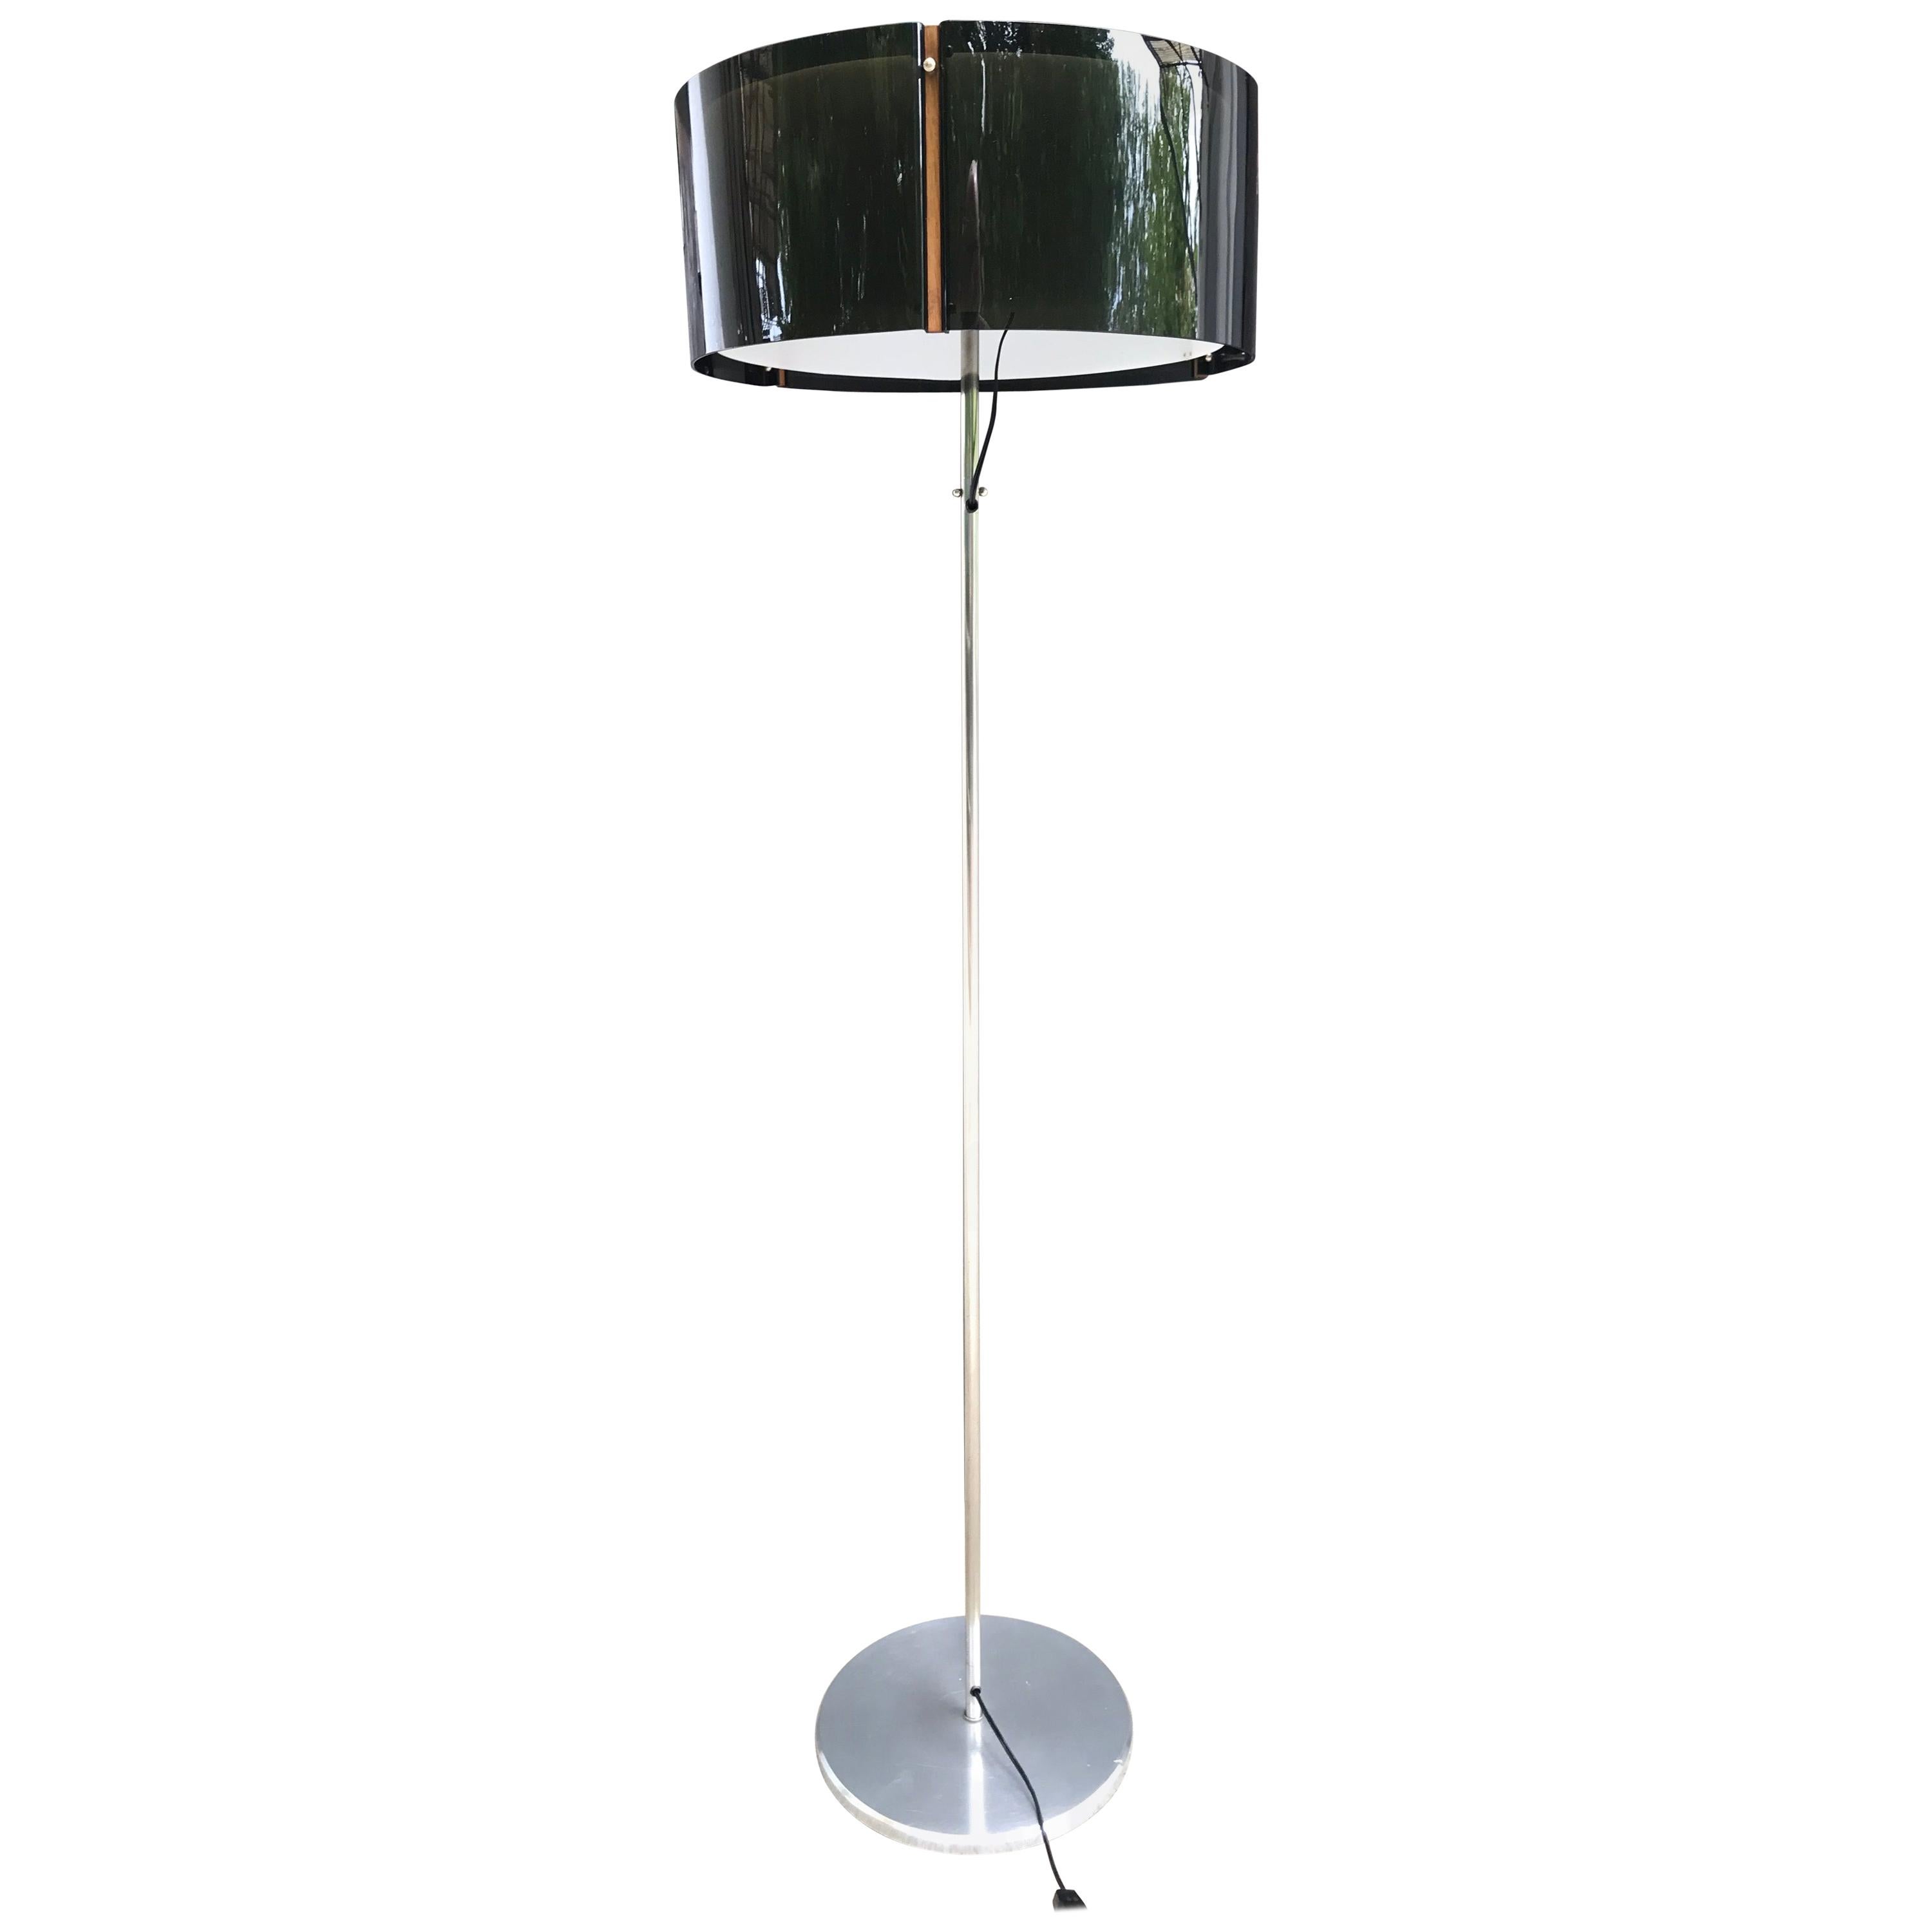 Danish Midcentury Floor Lamp in a Very Stylish Period Design By Kemp & Lauritzen For Sale